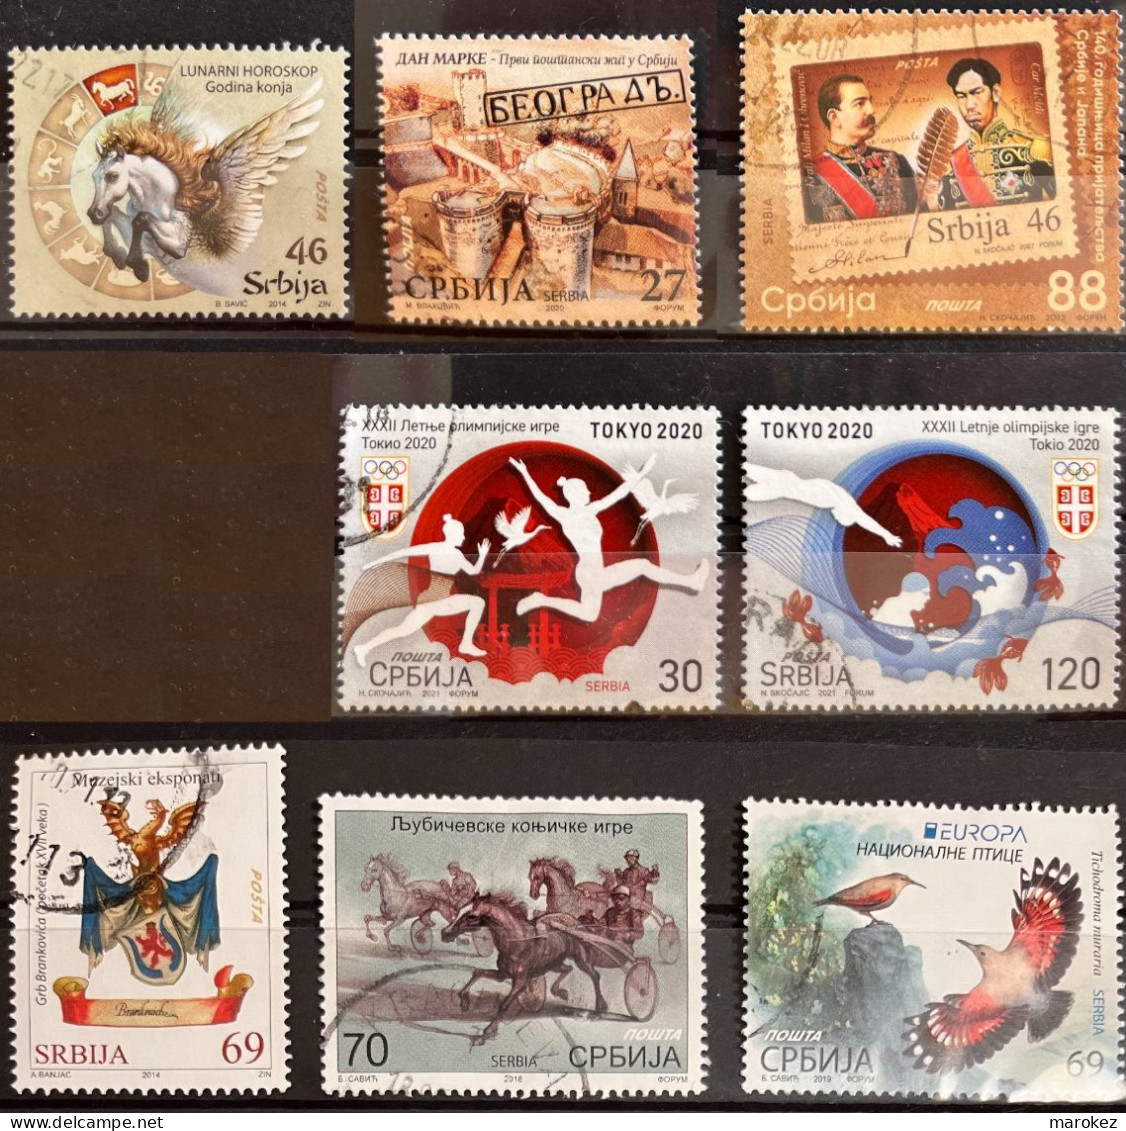 SERBIA 2014-2022 8 Postally Used Stamps MICHEL # 546,566,814,877,944,1017,1018,1085 - Serbia